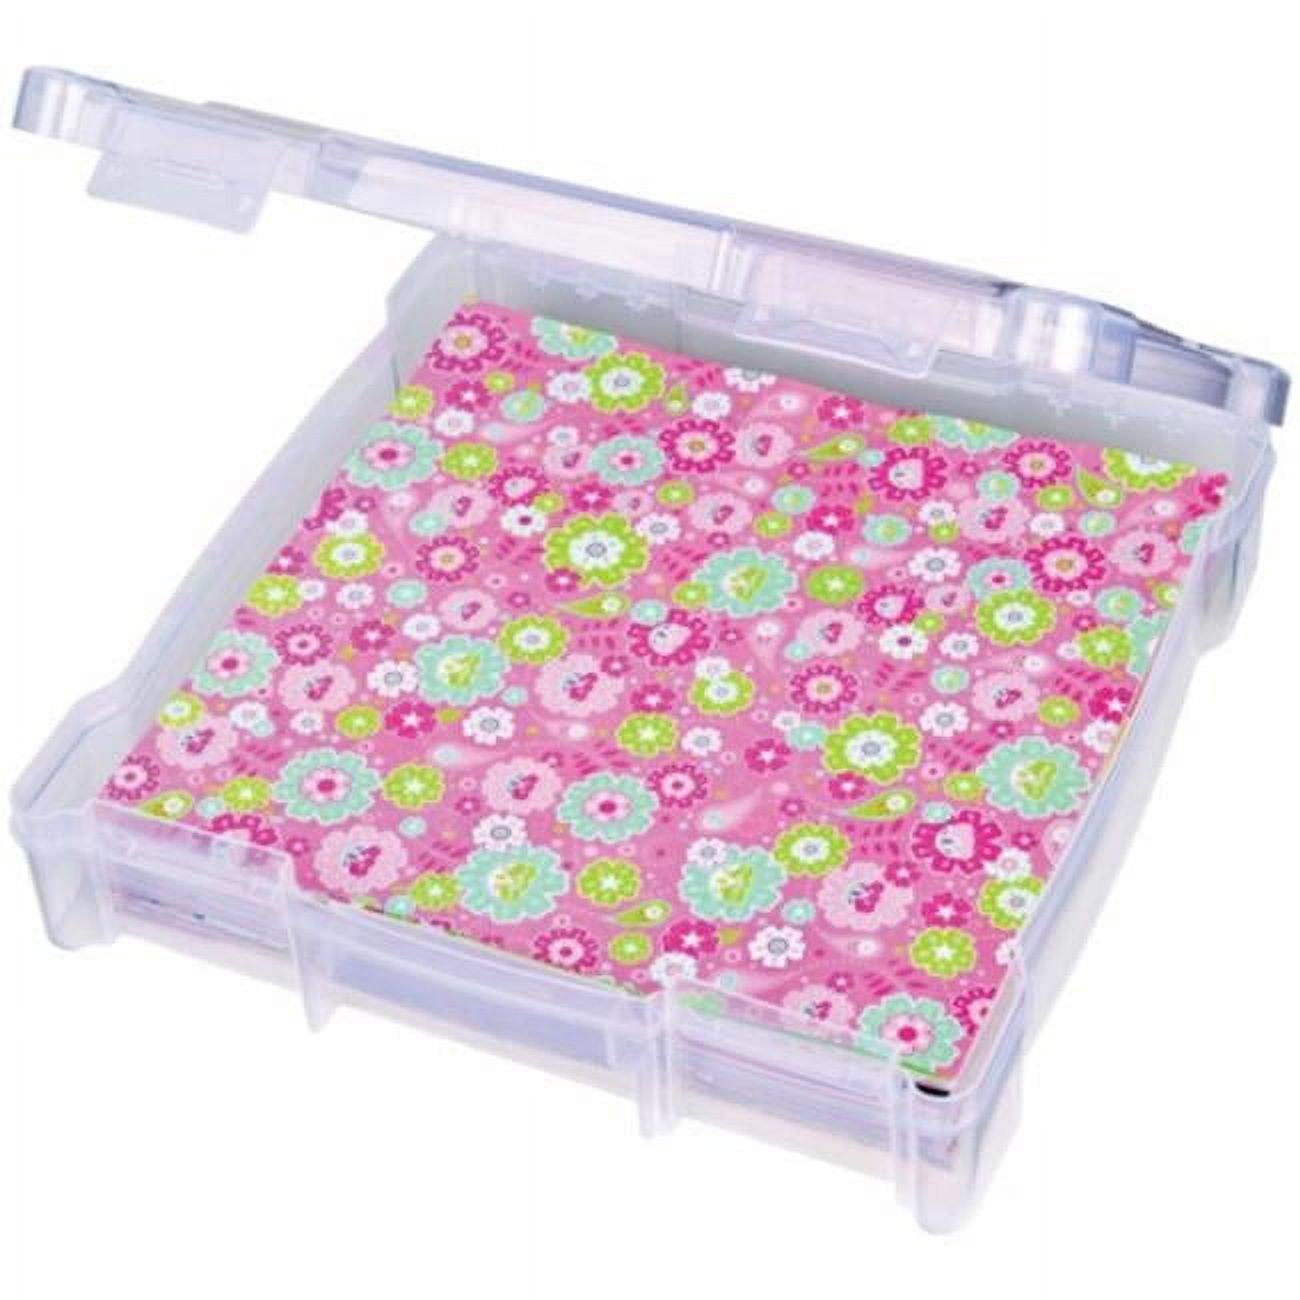 64 Grids Diamond Painting Boxes, TSV Clear Plastic Organizer Box, 5D  Diamond Embroidery Accessories Storage Container with Adjustable Dividers  for Art